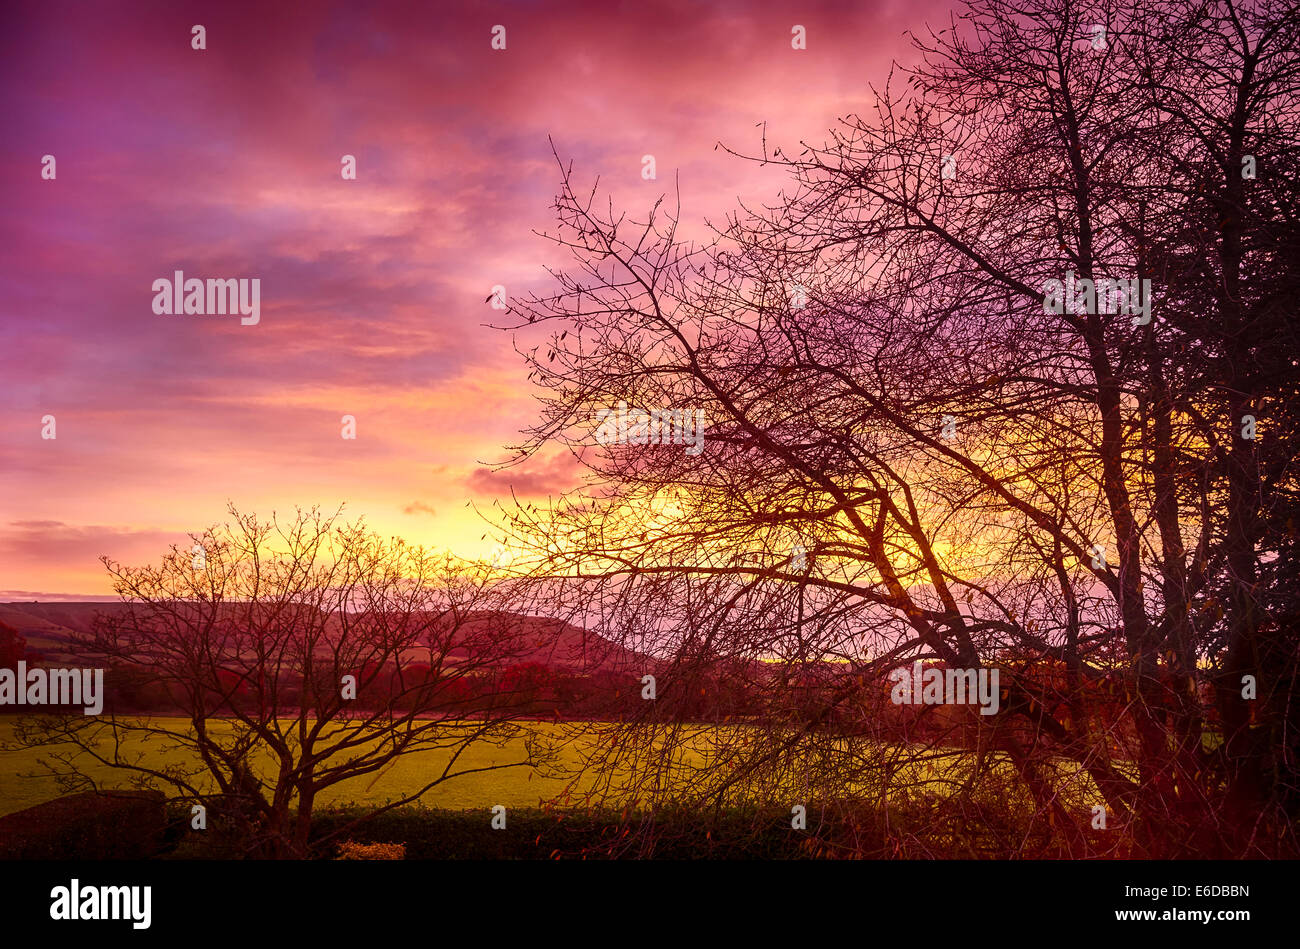 ARTISTIC representation of a dawn sky over Wiltshire UK [DELIBERATELY PROCESSED TO EMPHASIZE DRAMATIC COLOURS AT DAWN] Stock Photo